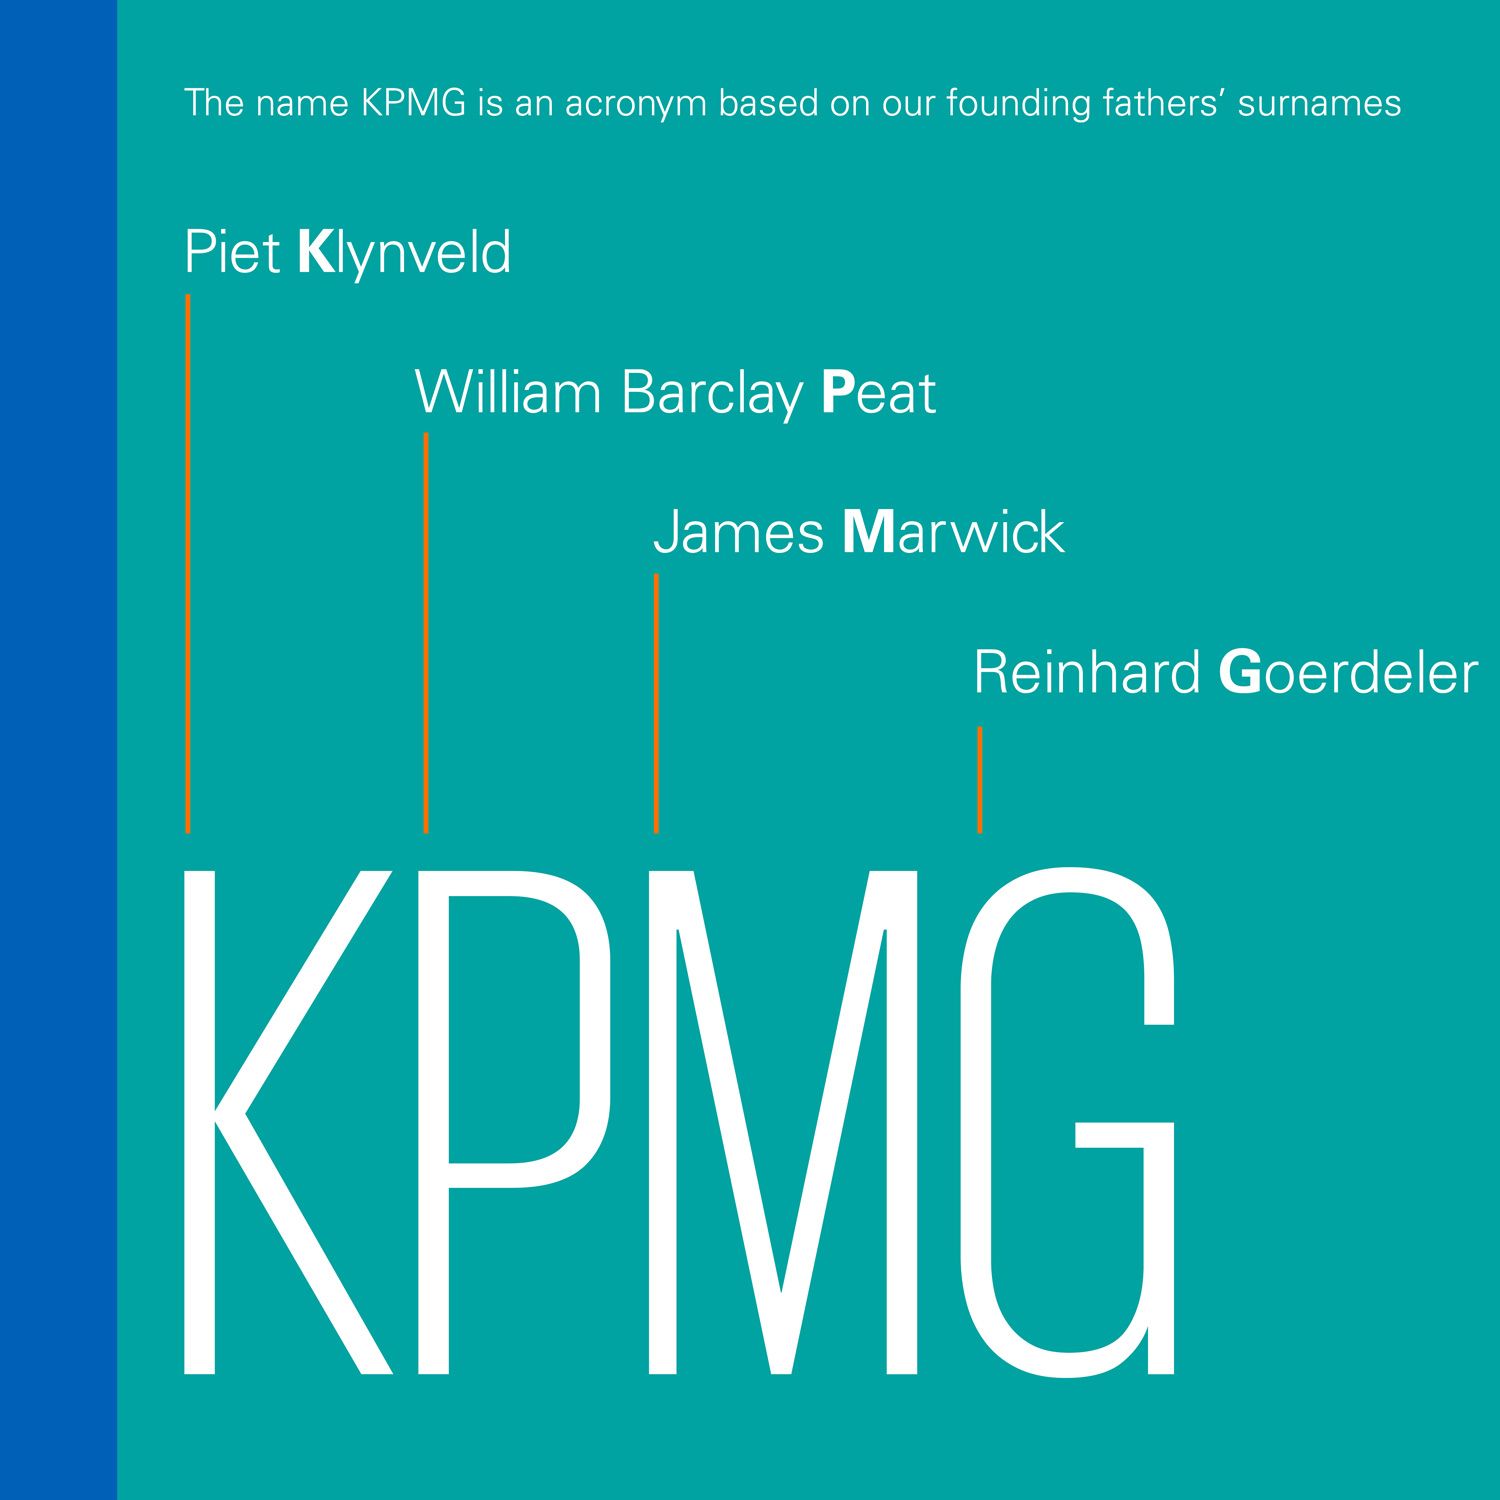 KPMG is short for